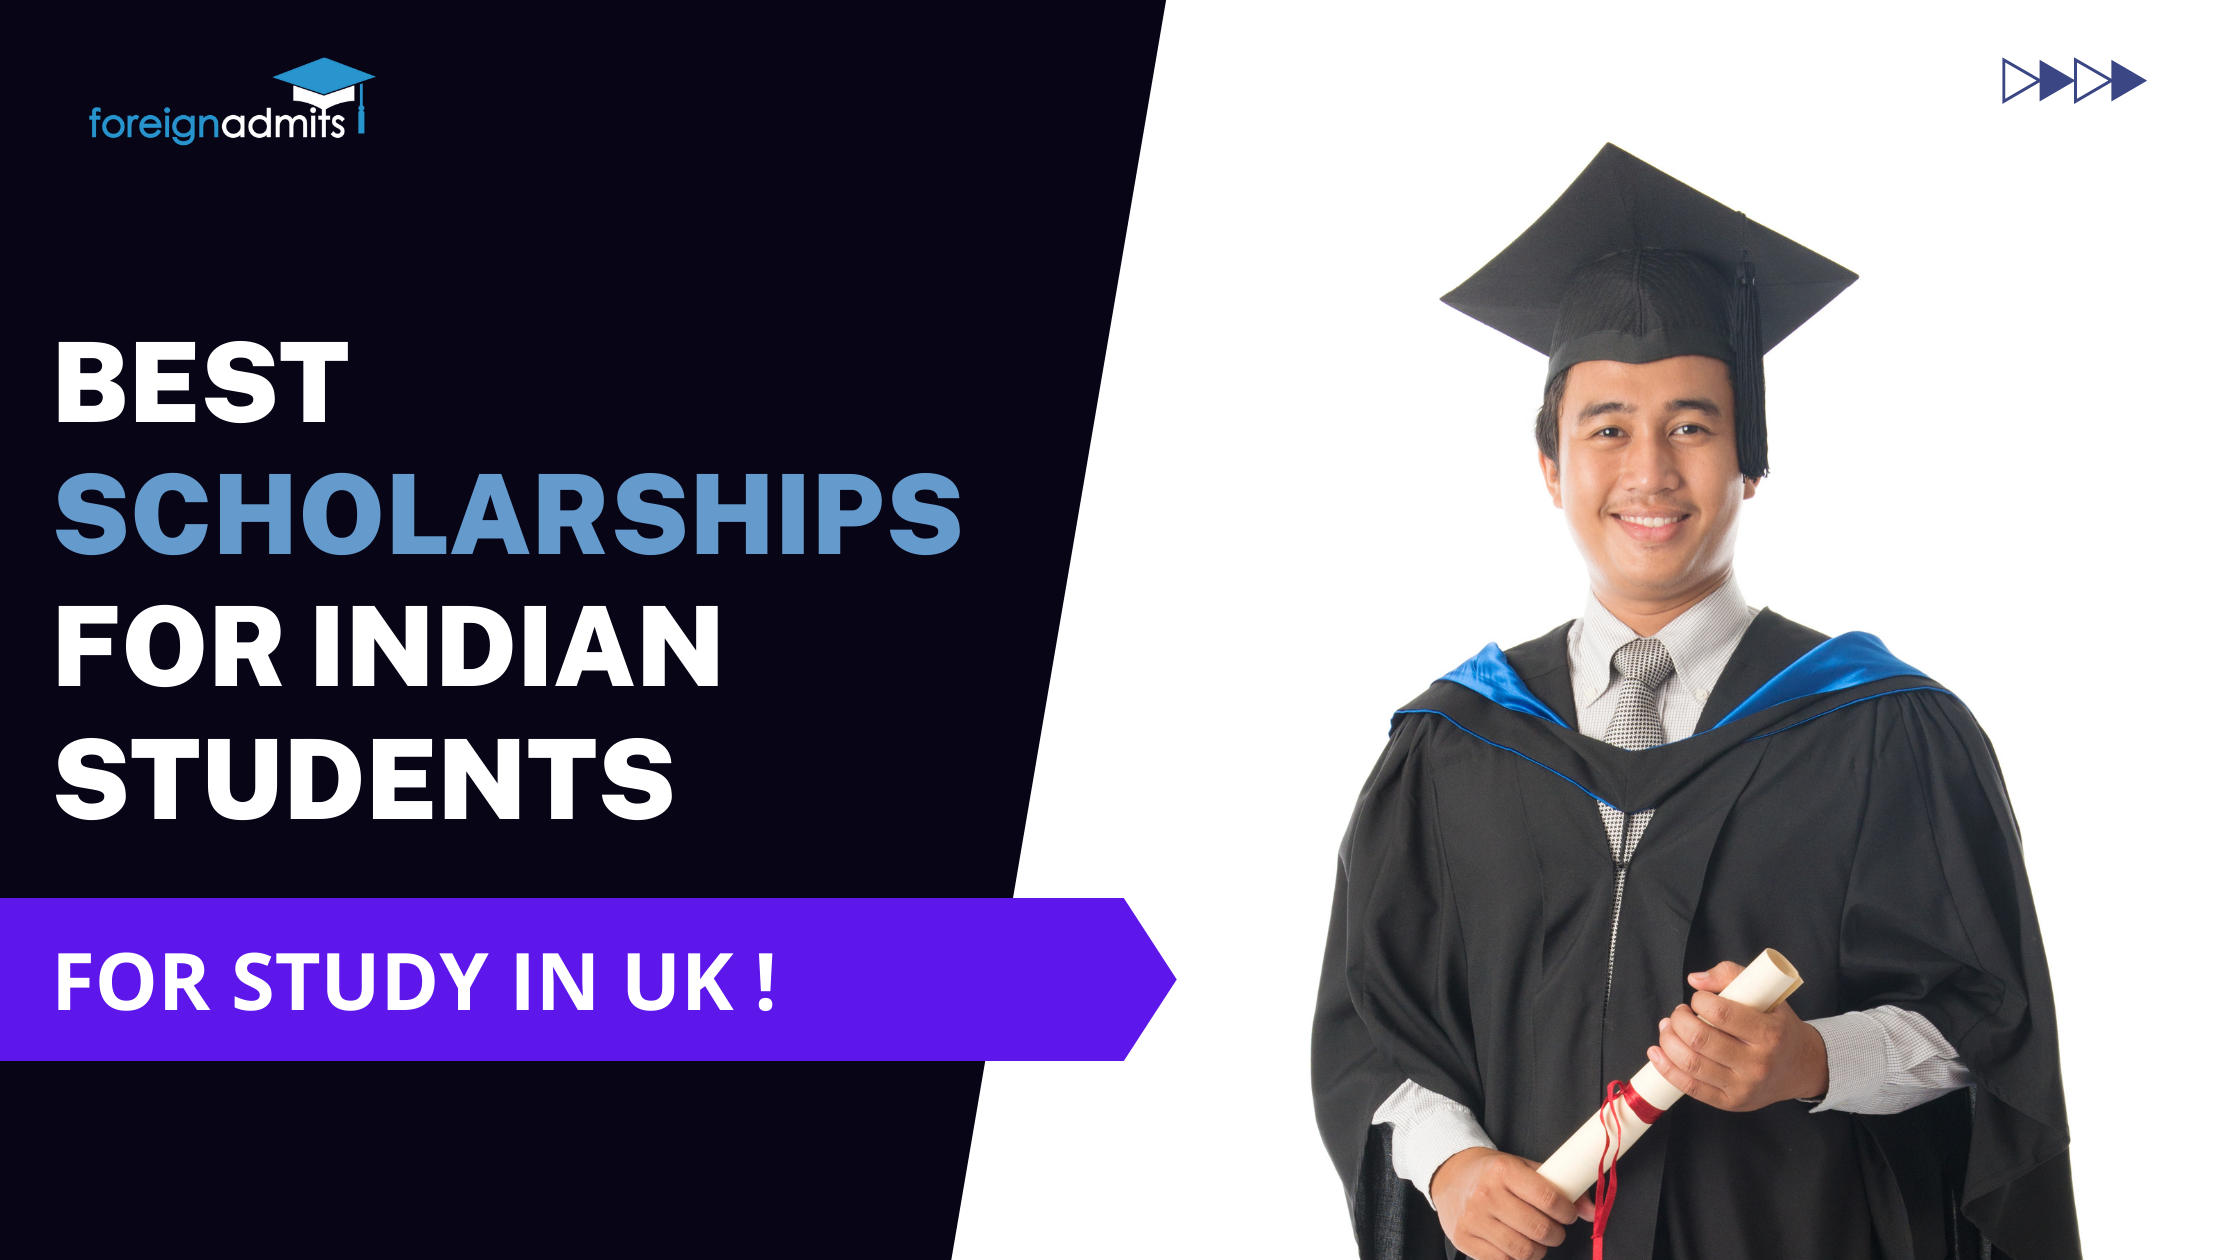 Best scholarships for Indian students to study in UK